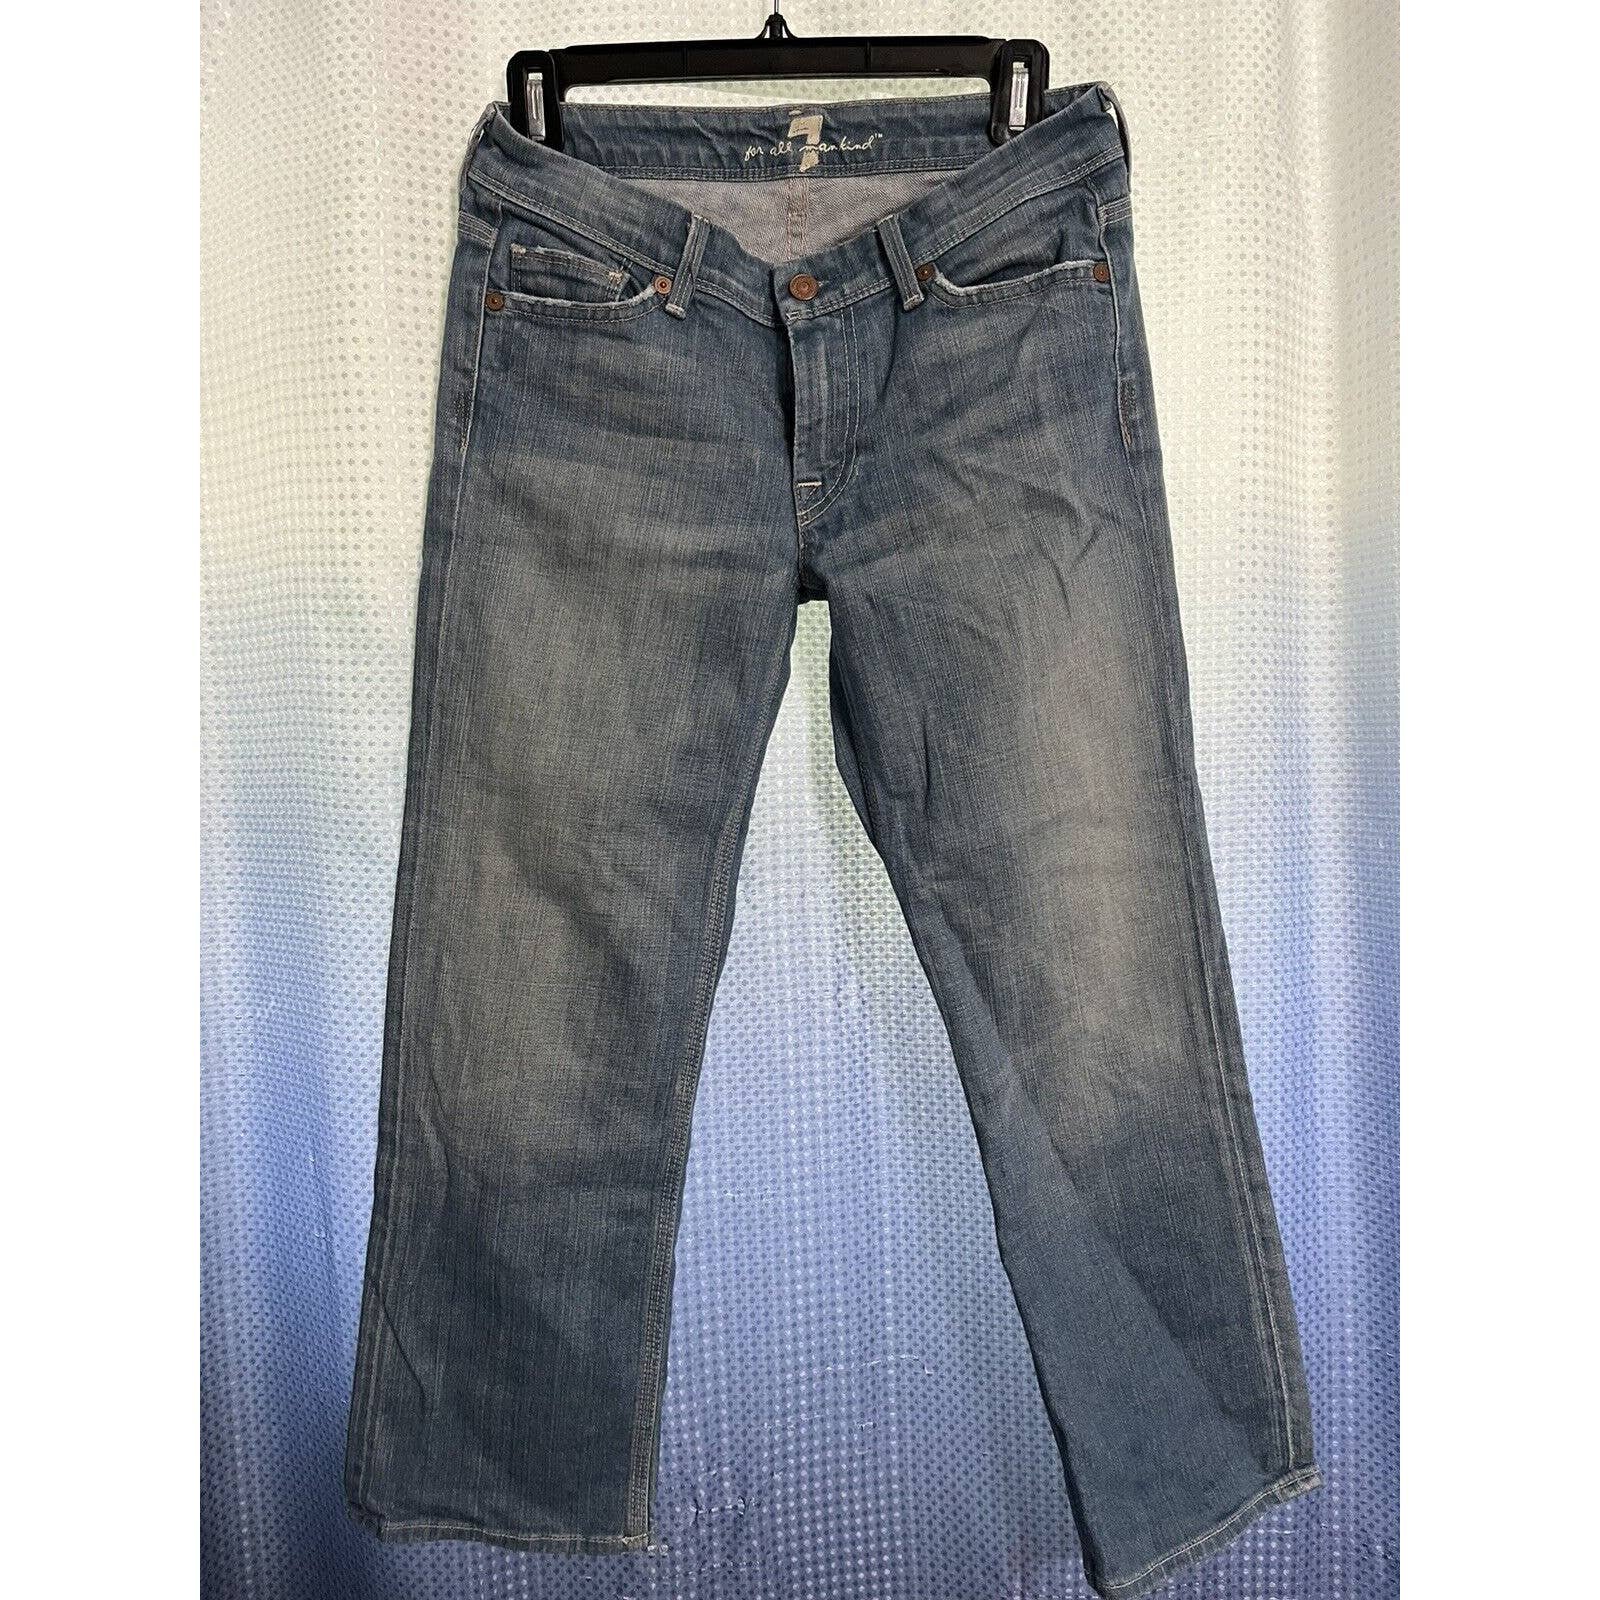 large selection Seven 7 For All Mankind Jeans Straight 